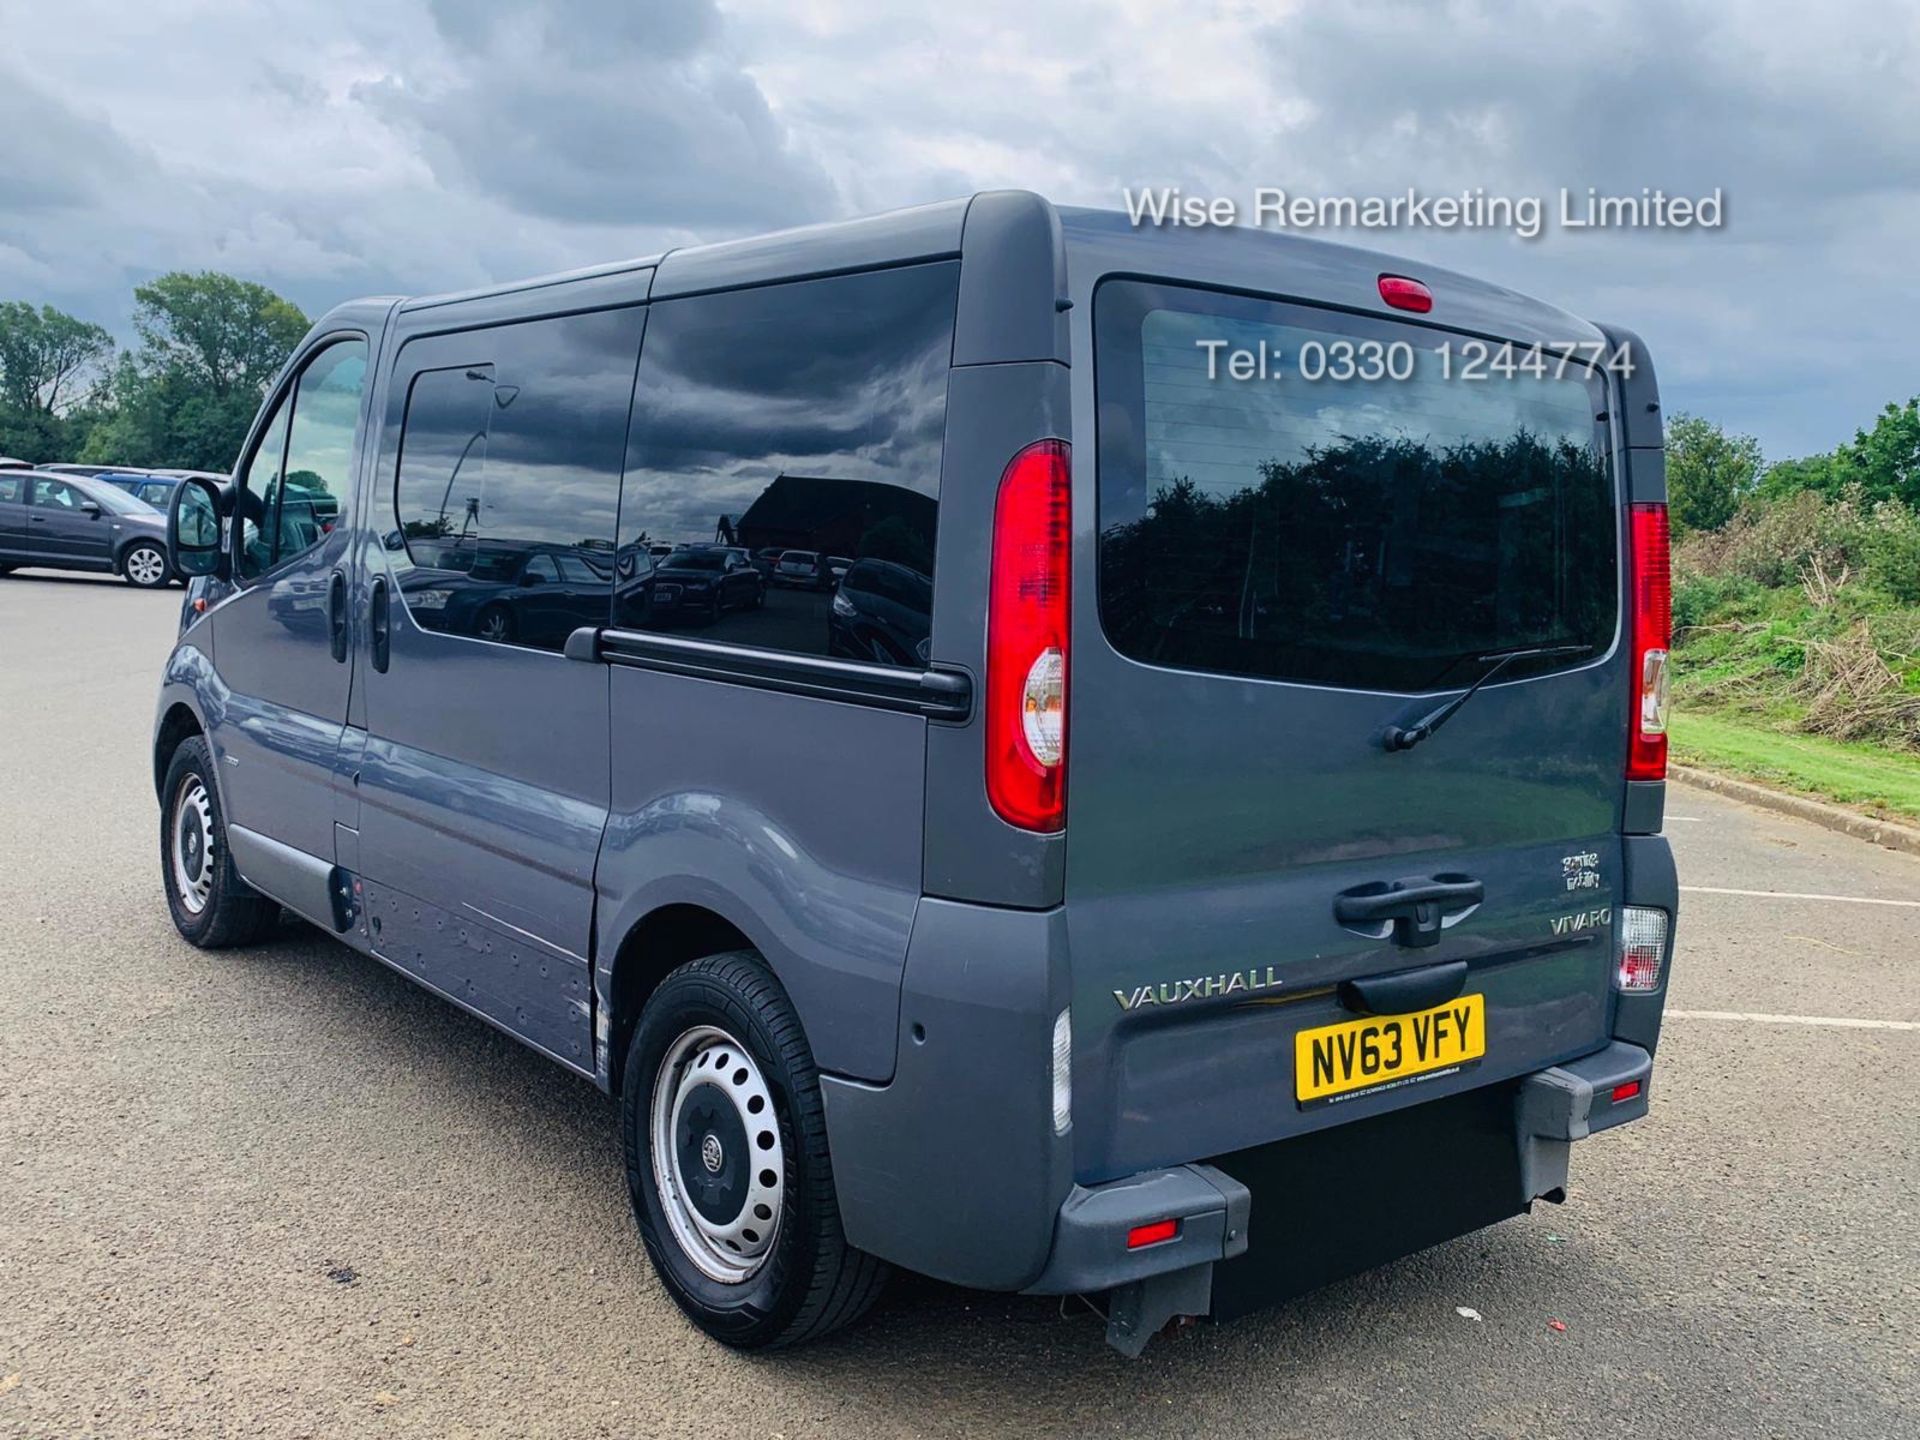 Vauxhall Vivaro 2.0 CDTI 2900 Minibus - 2014 Model - Wheel Chair Access -1 Owner From New -History - Image 2 of 21